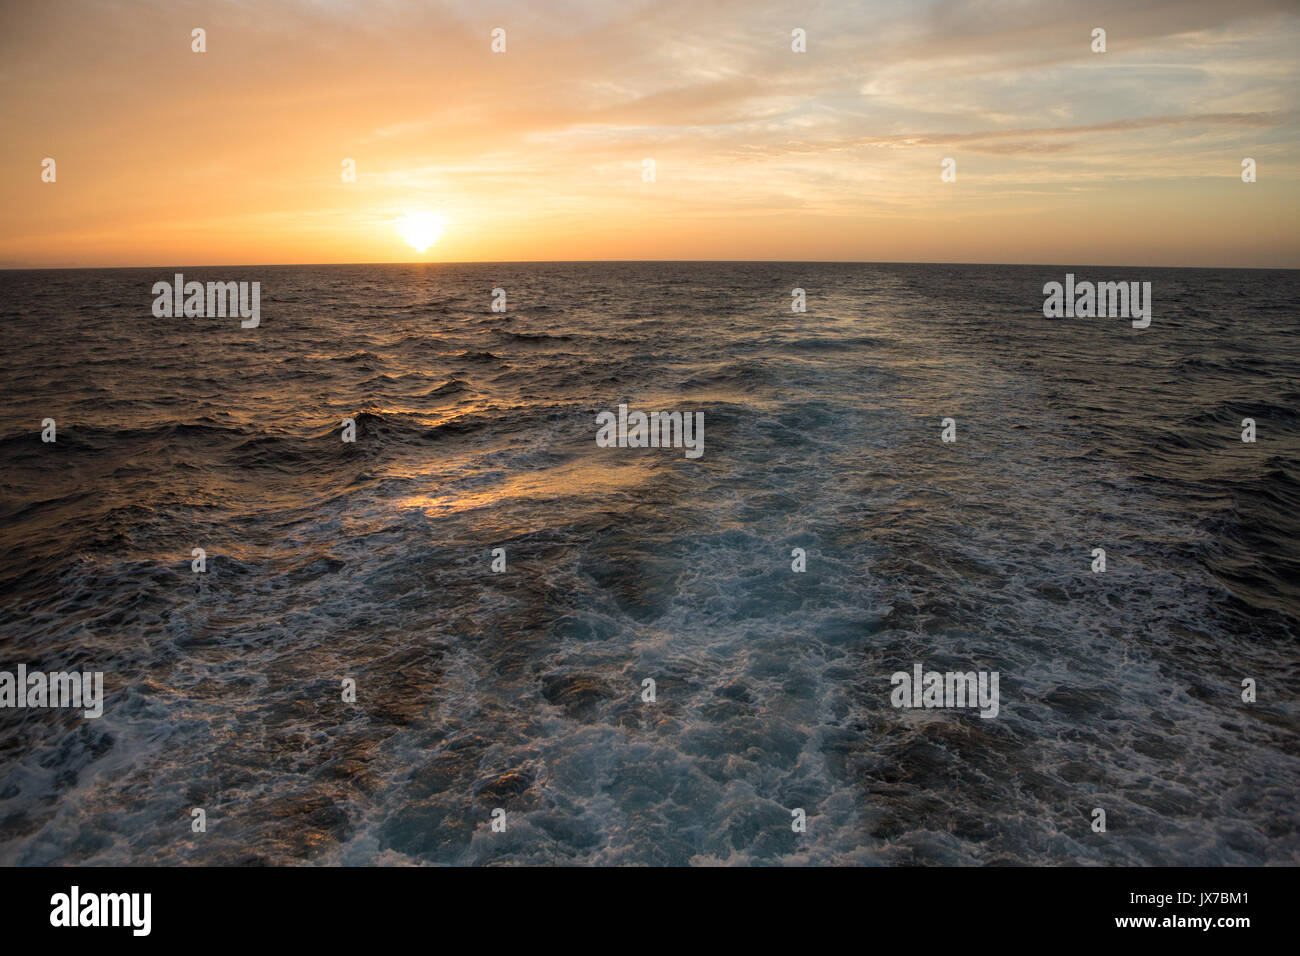 The sun rises above the horizon as waves and wake are visible  in waters near Isla Coiba National Park. Stock Photo